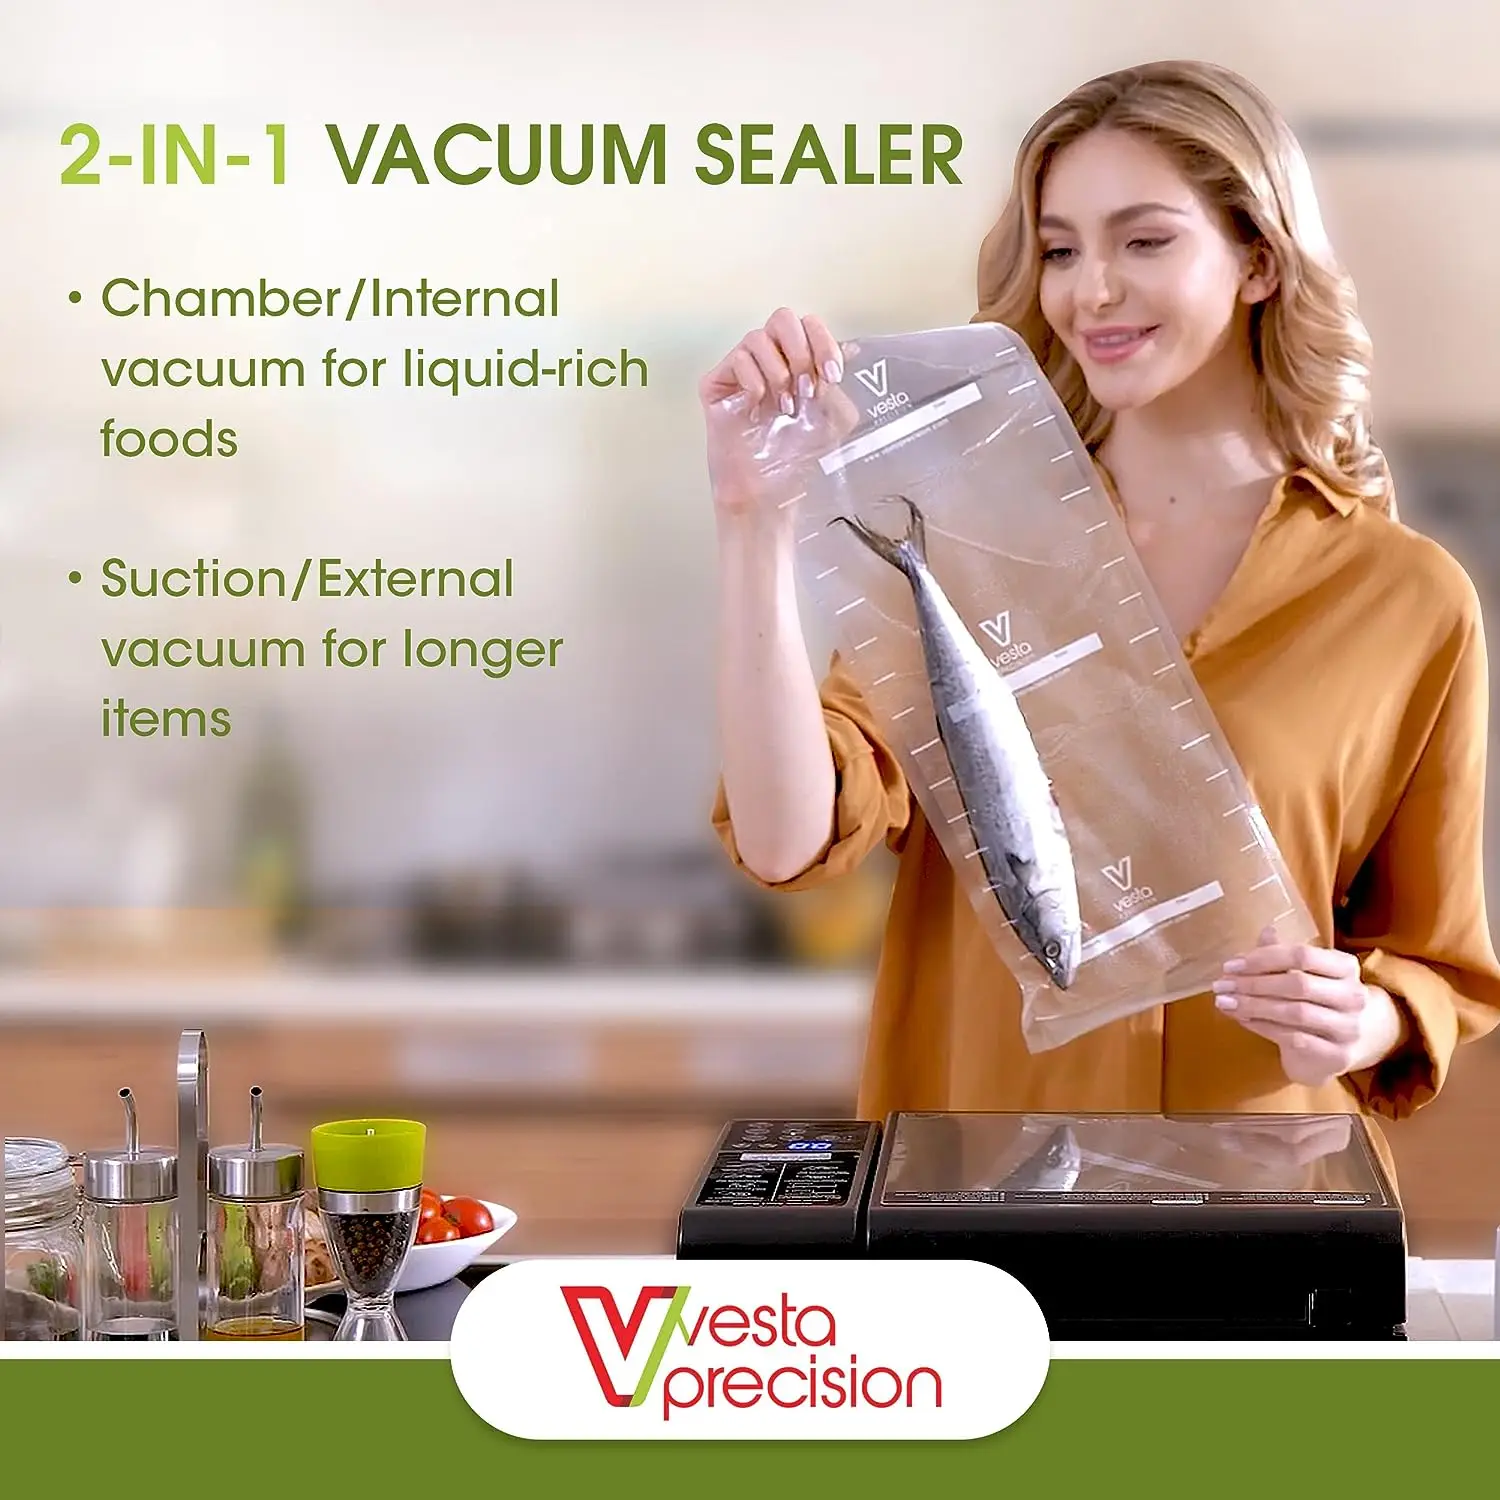 https://ae01.alicdn.com/kf/Sa0184d46de6d4fce9d03ffeb79d2ba5fd/Vacuum-Sealer-by-Vesta-Precision-Chamber-Chamber-and-External-Vacuum-Sealing-Compact-and-Powerful-Vacuum.jpg